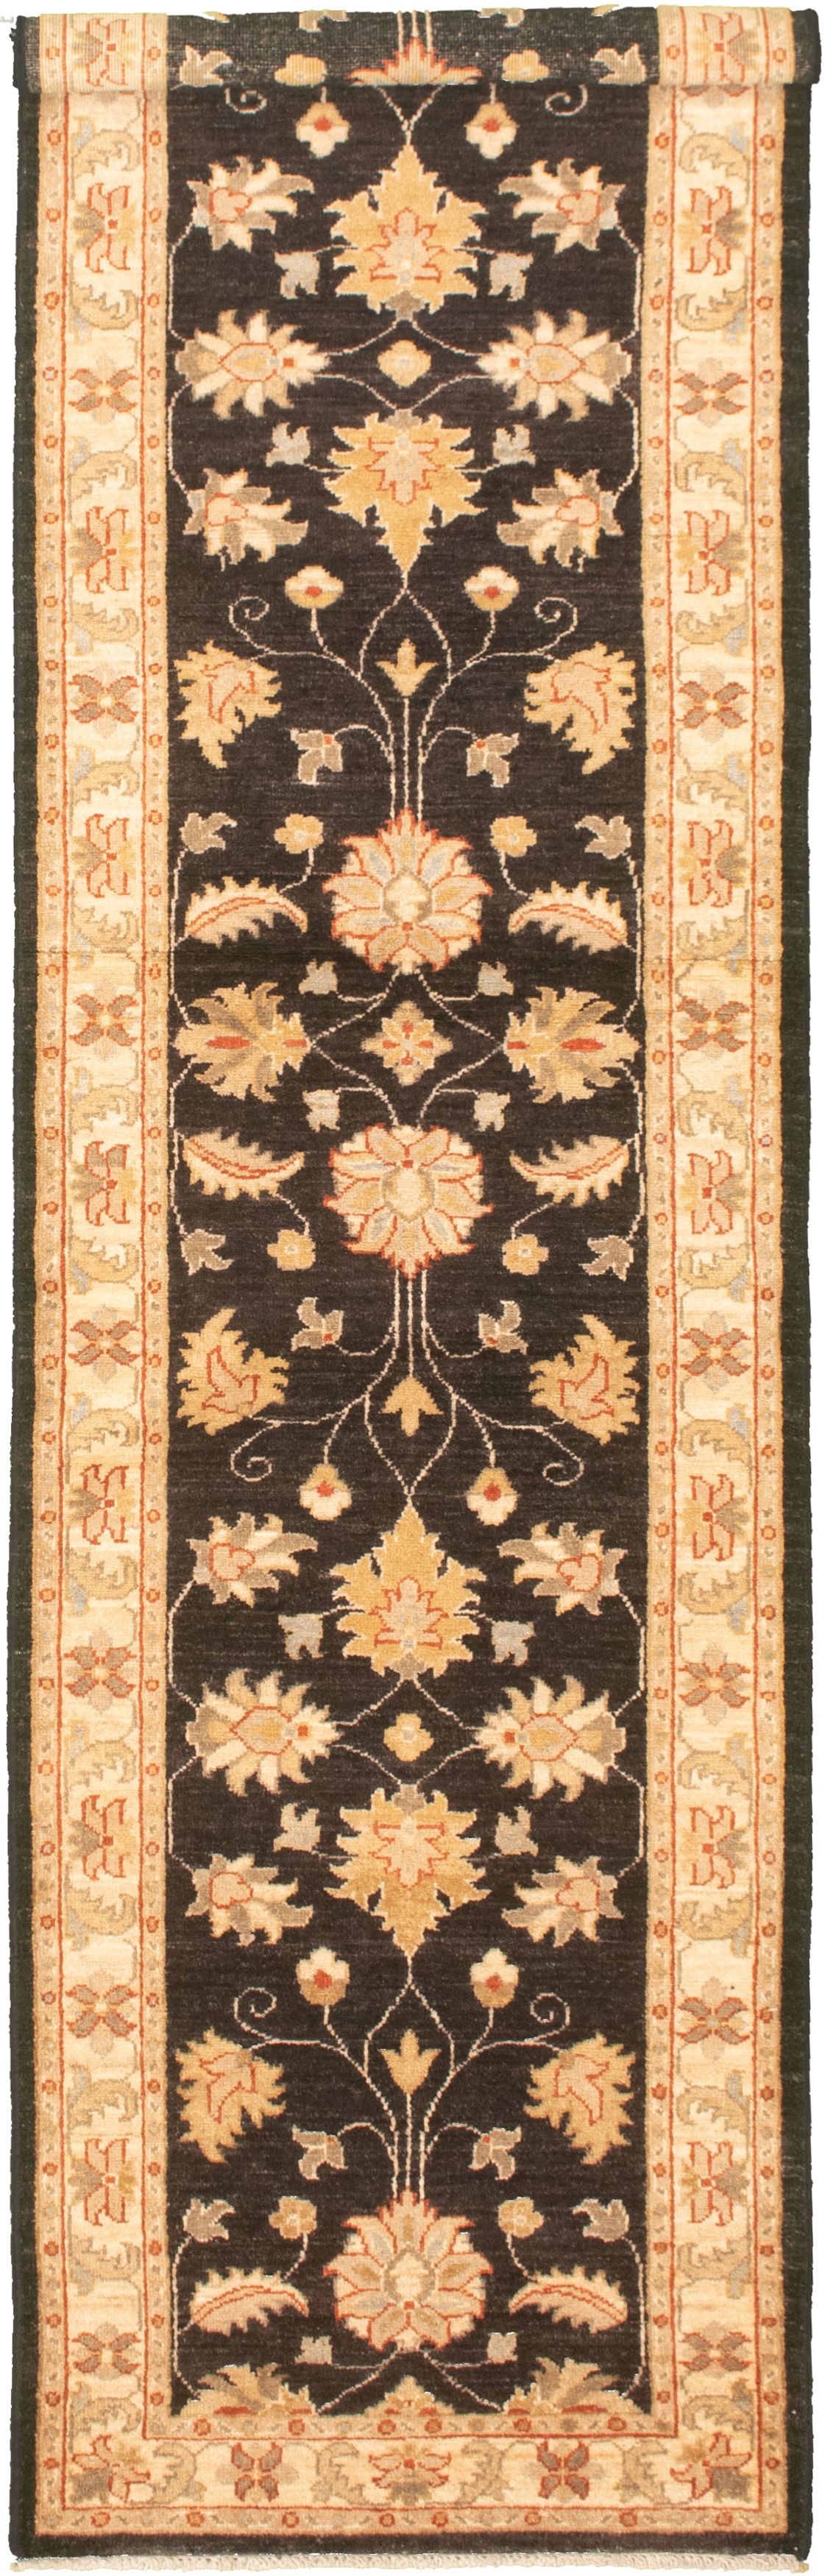 Hand-knotted Chobi Finest Black Wool Rug 2'7" x 10'9" Size: 2'7" x 10'9"  